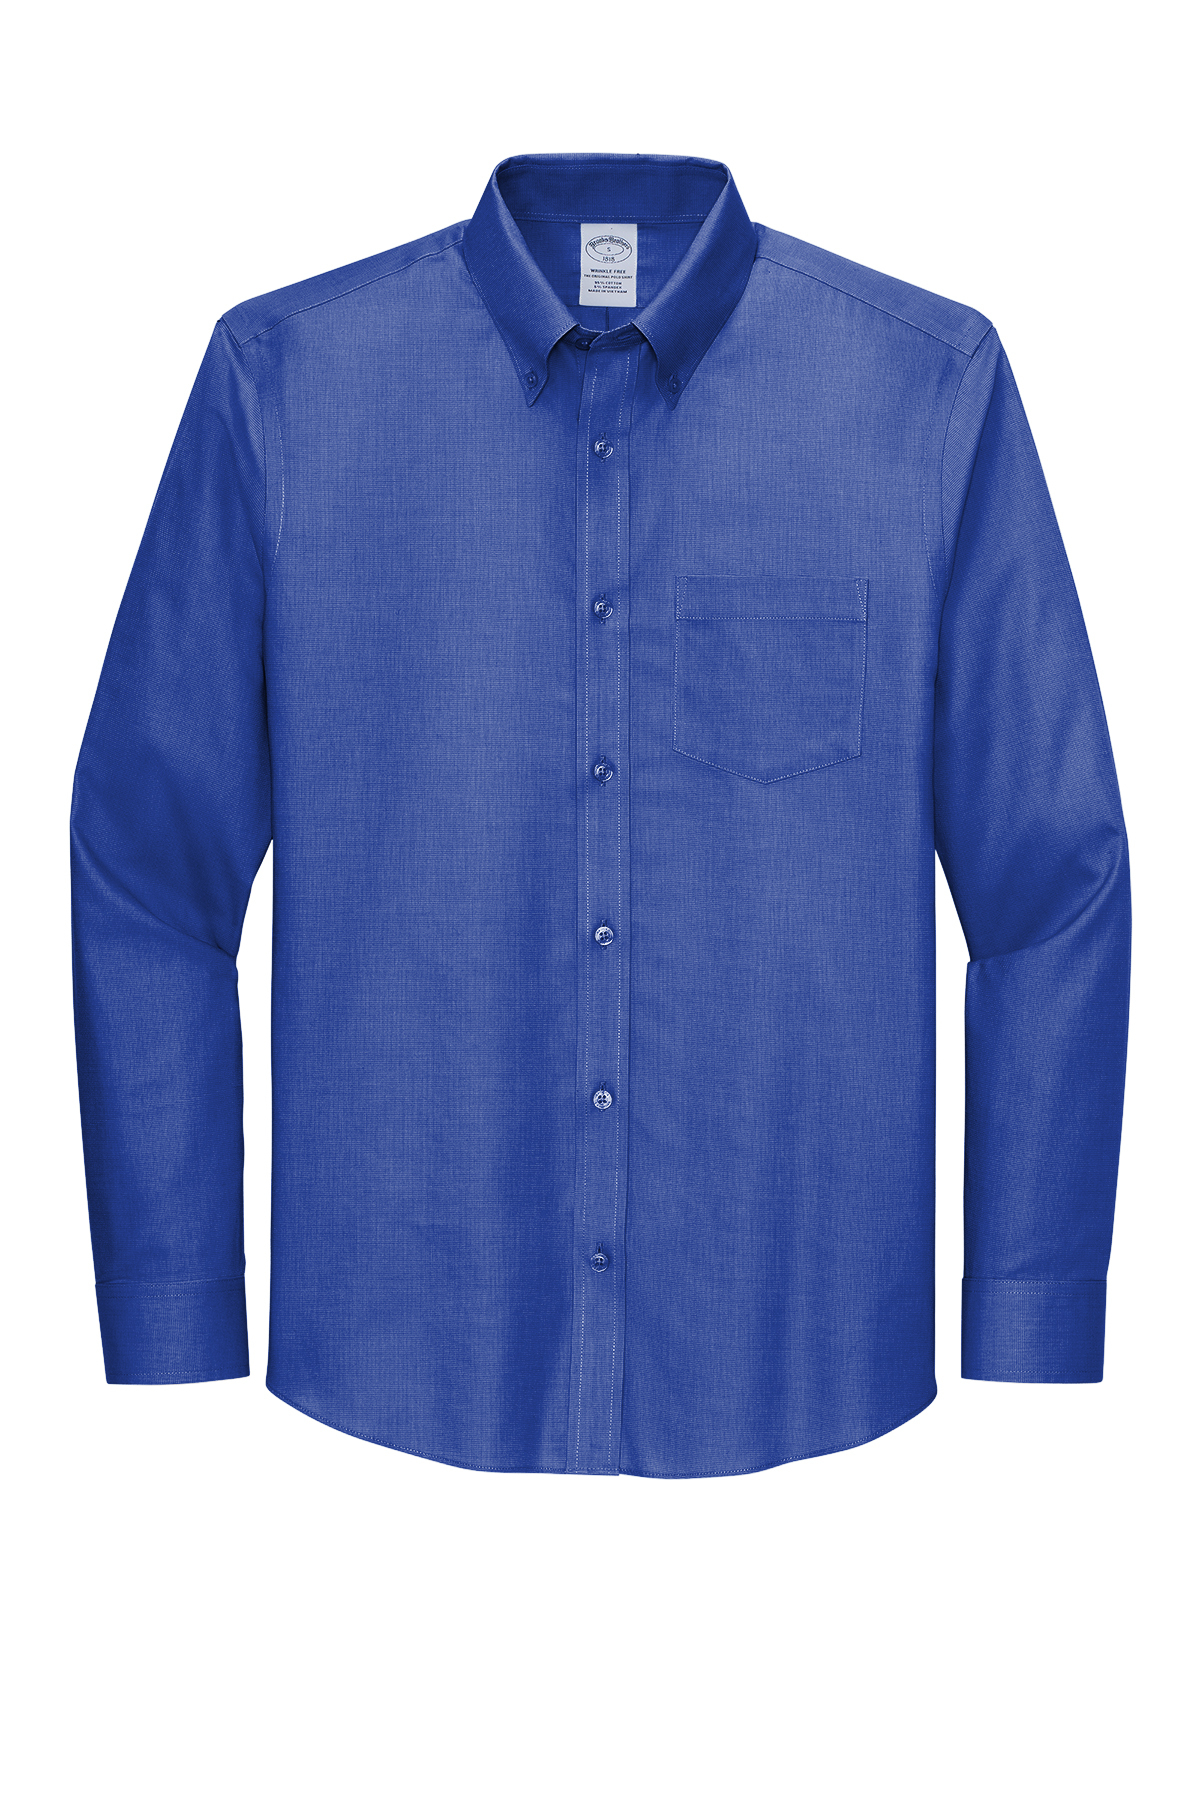 Brooks Brothers Wrinkle-Free Stretch Nailhead Shirt | Product | Online ...